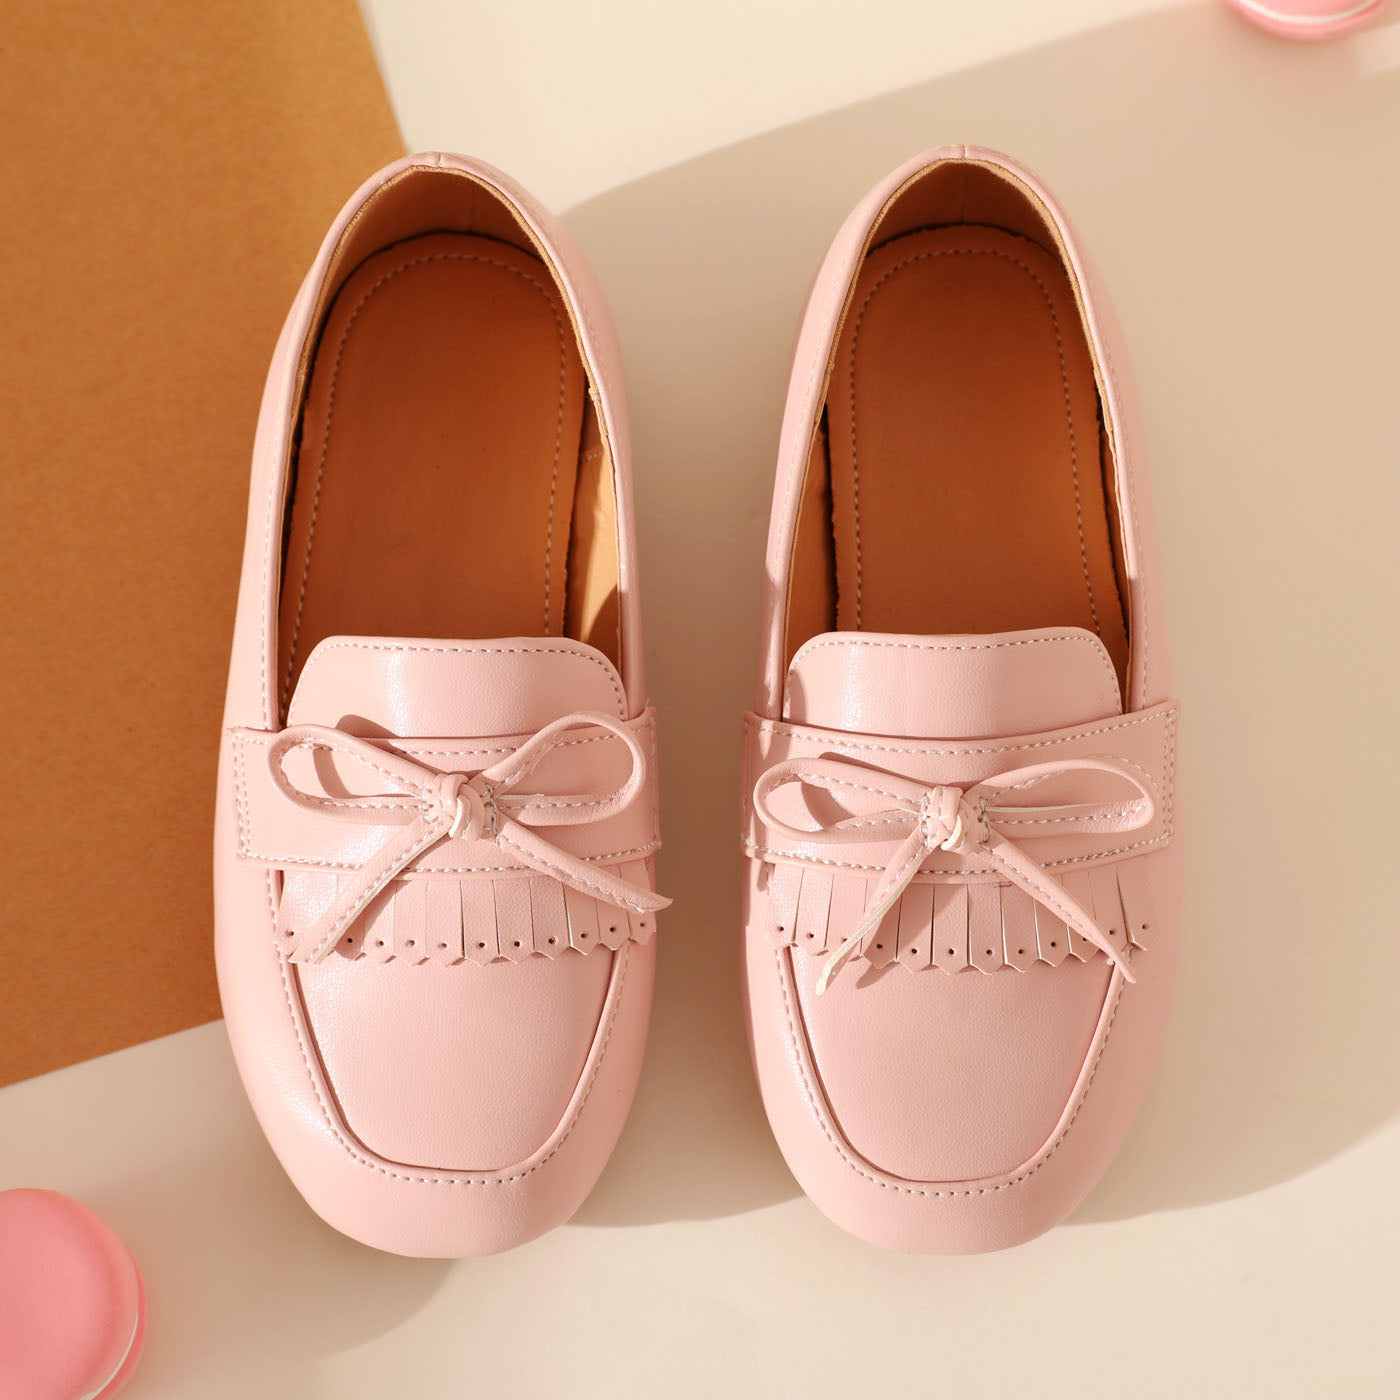 Toddler / Kid Bow & Tassel Decor Pink Loafers